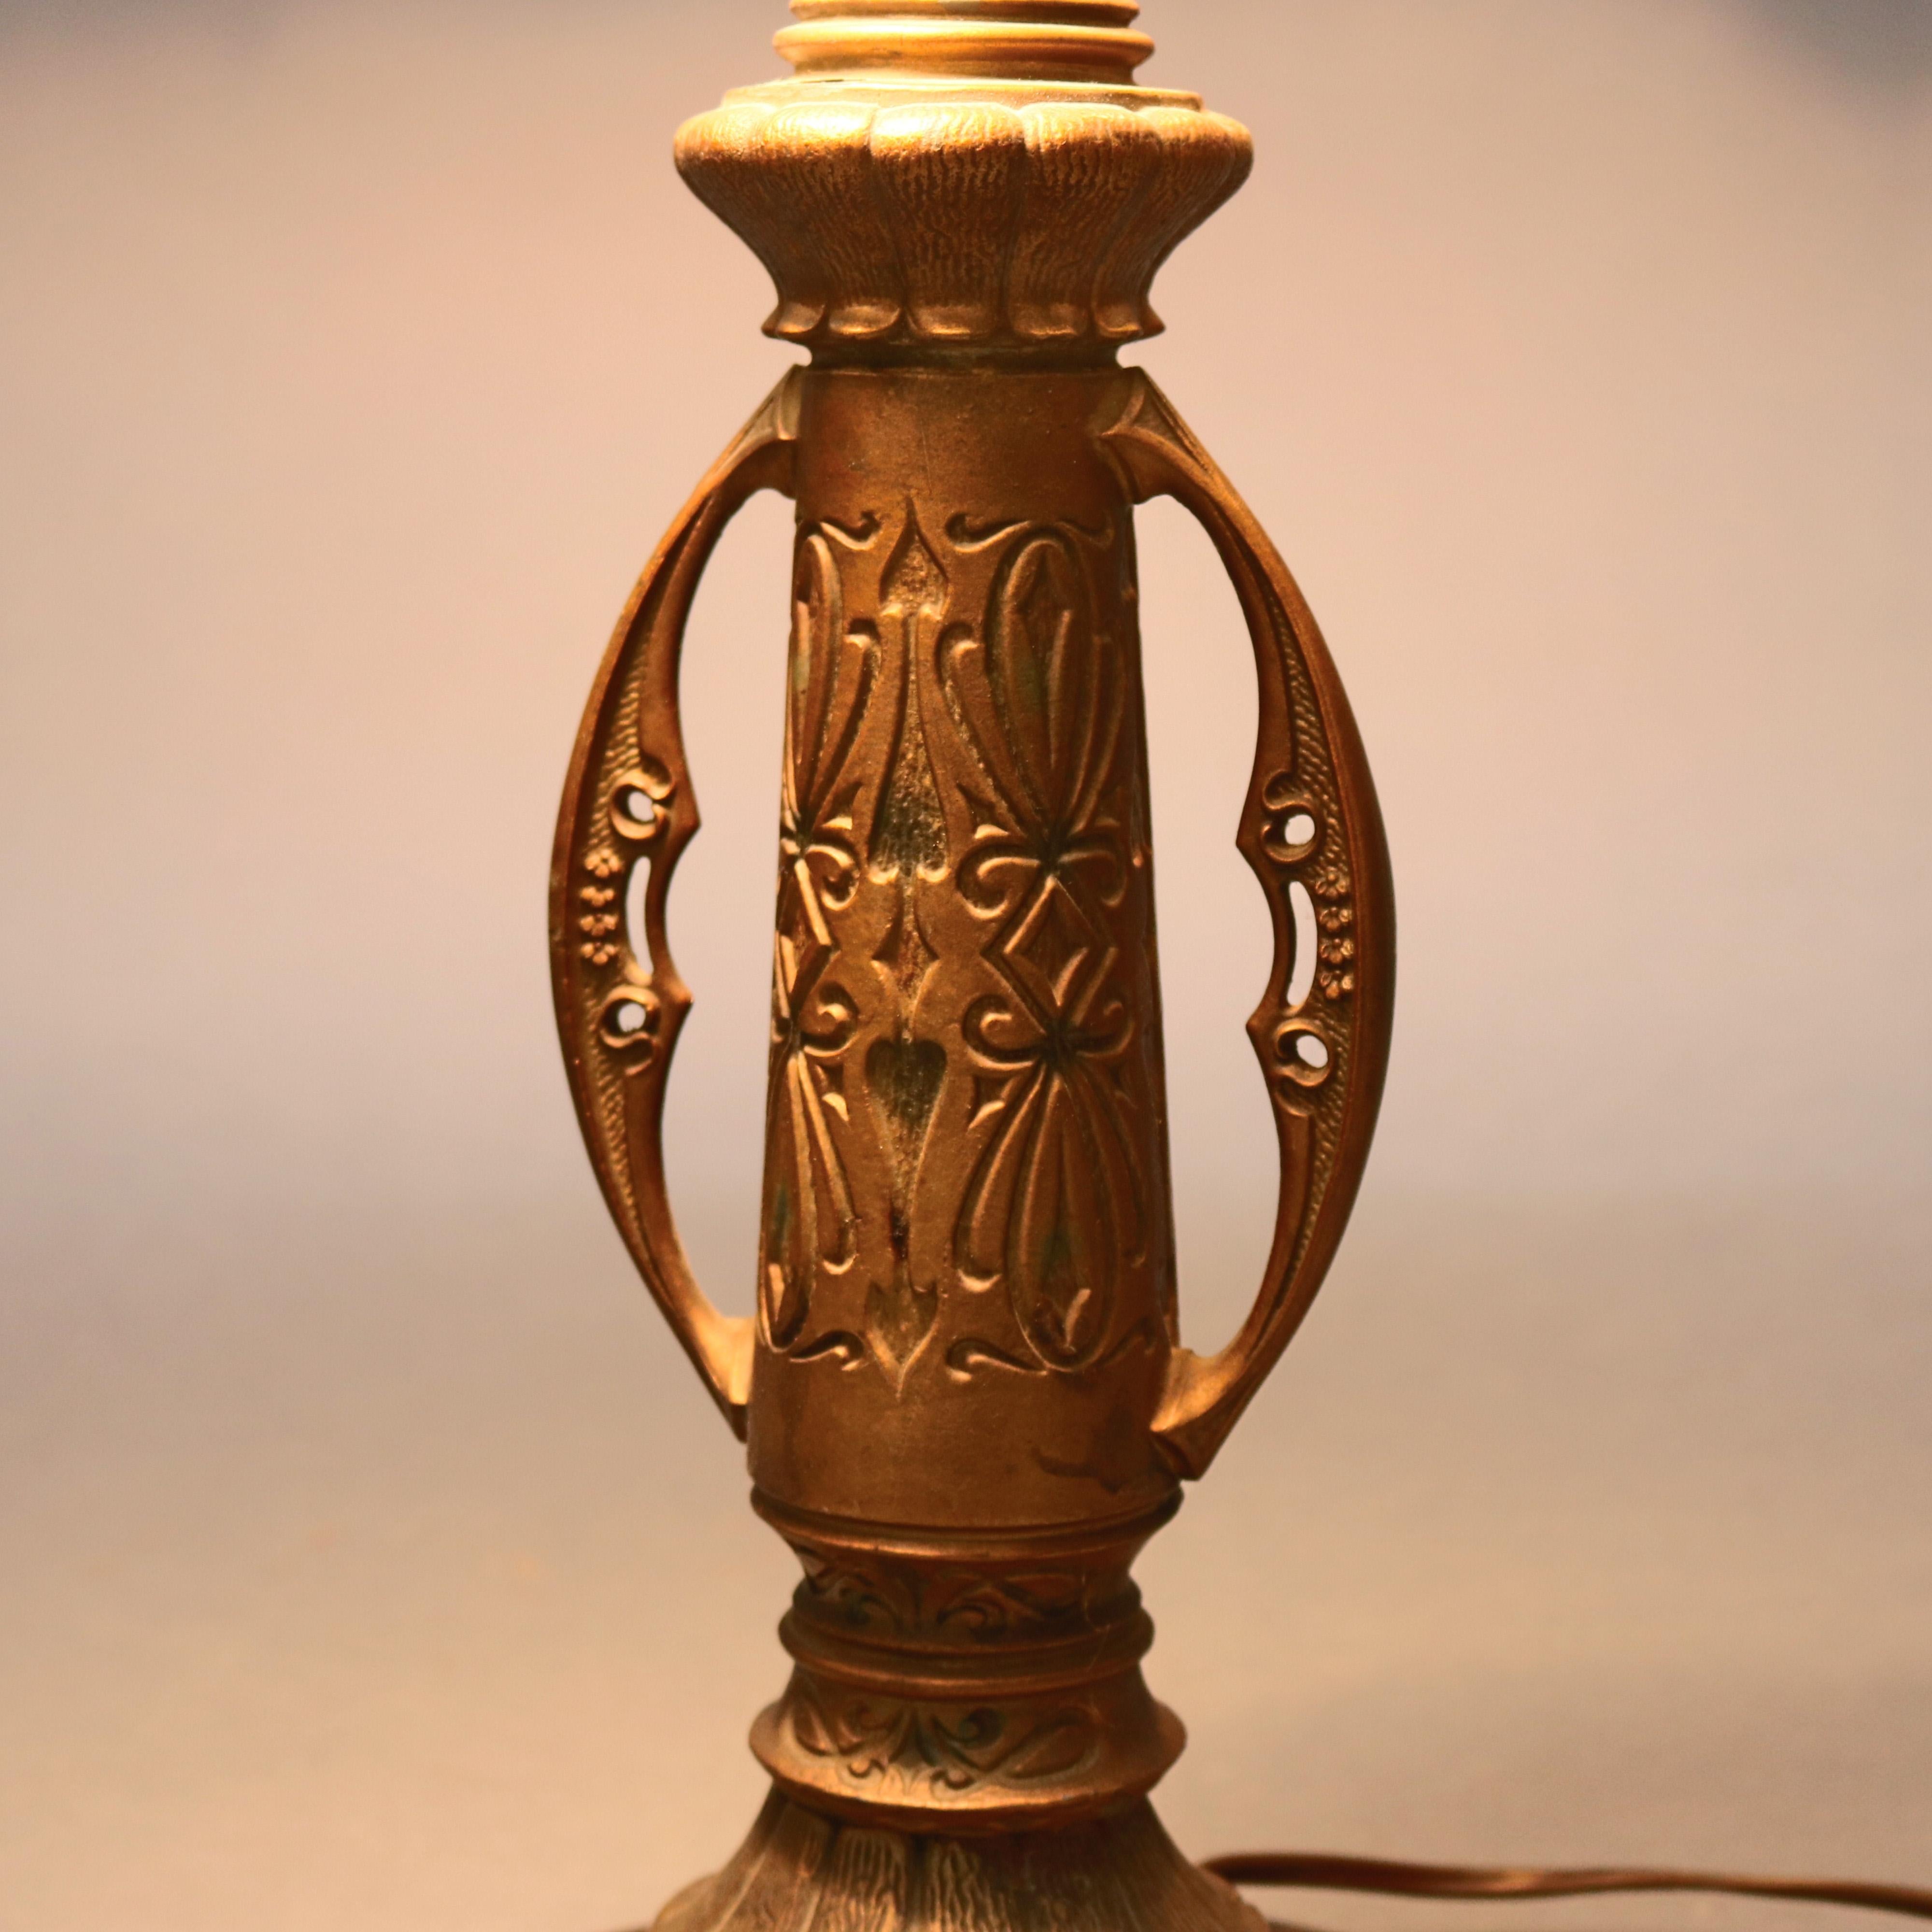 Antique Arts and Crafts era Bradley & Hubbard table lamp features stylized urn form double socket cast base with incised floral motif, dome form shade with cast filigree shade having foliate garland and wreath decoration and six bent slag glass